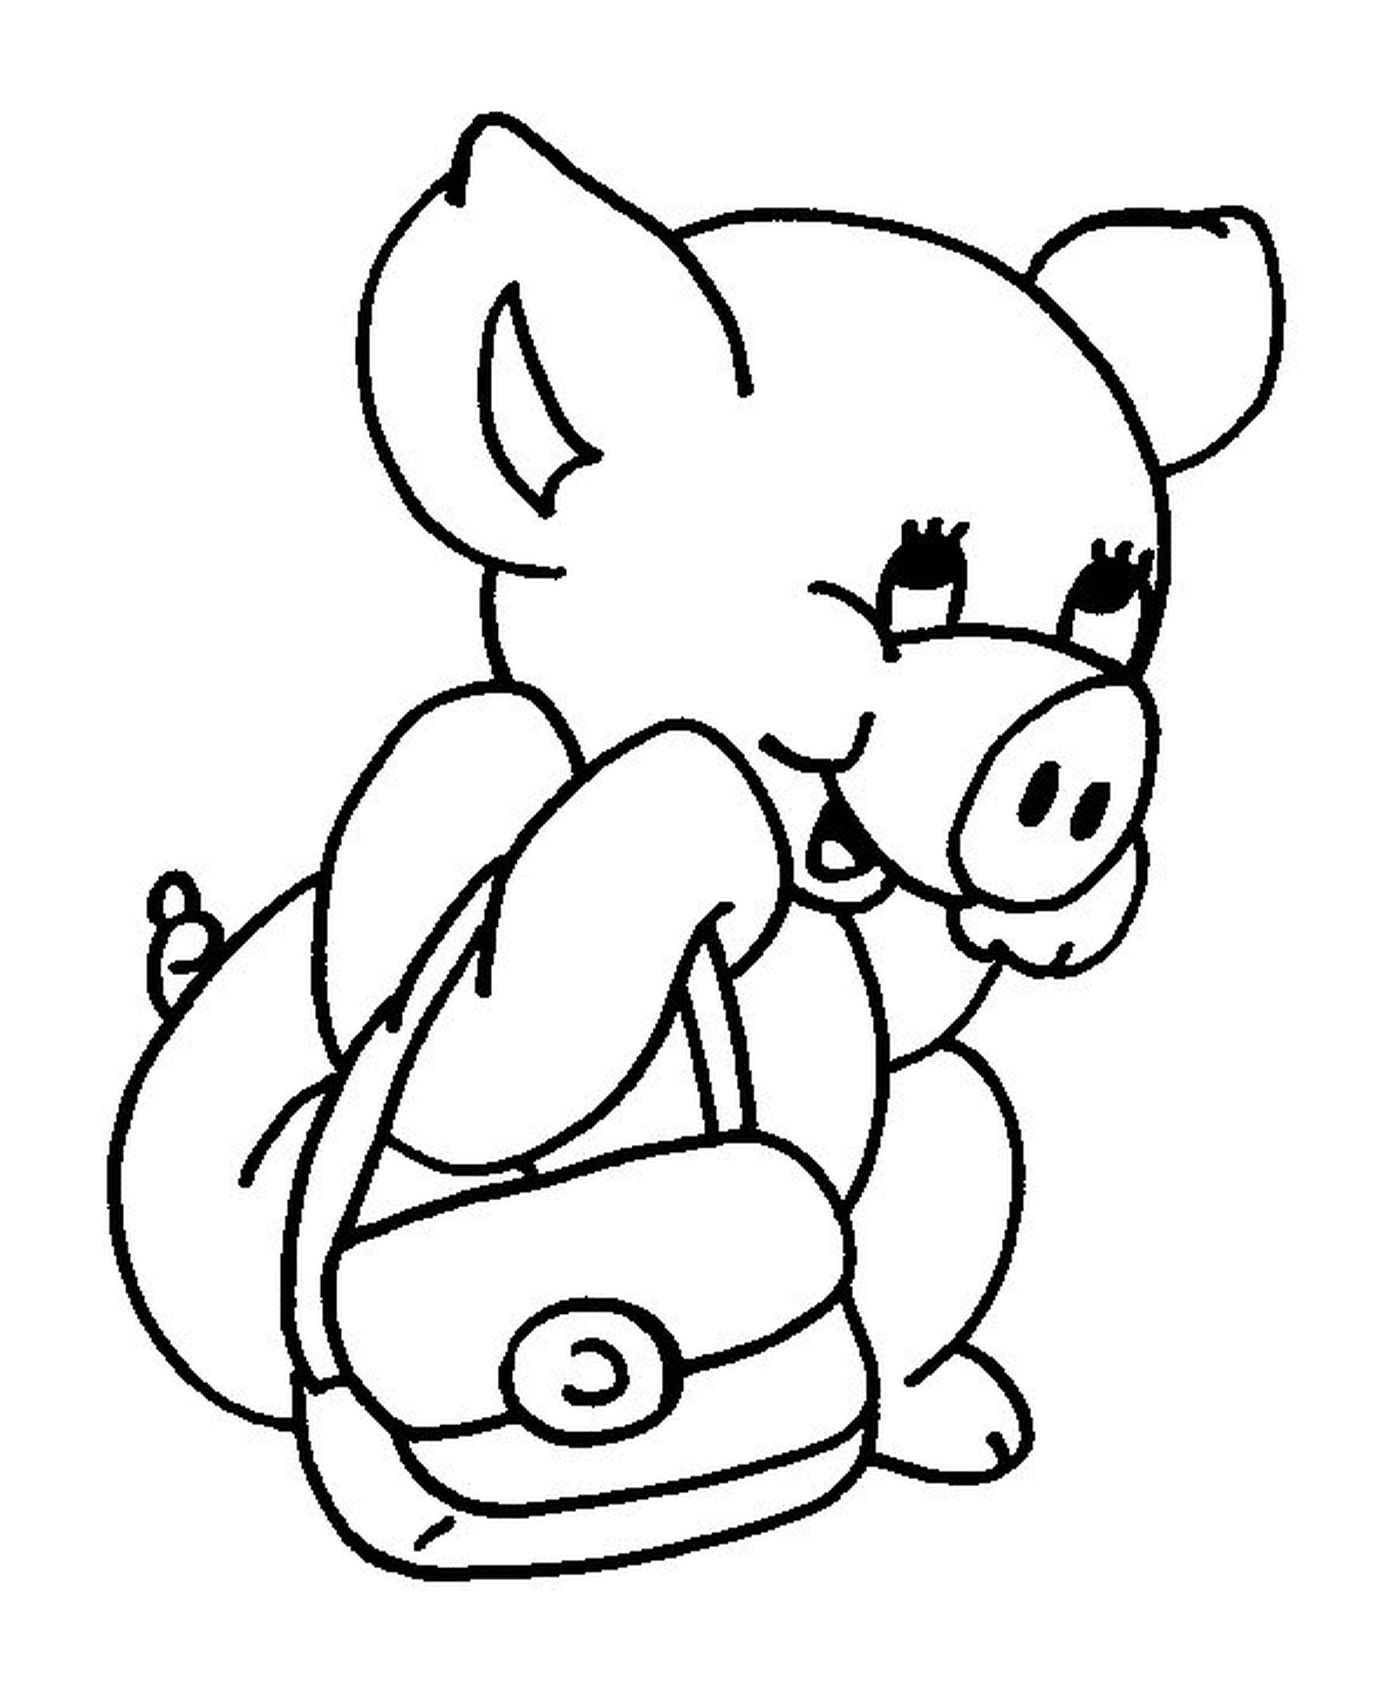  A pig who goes to school with a purse 